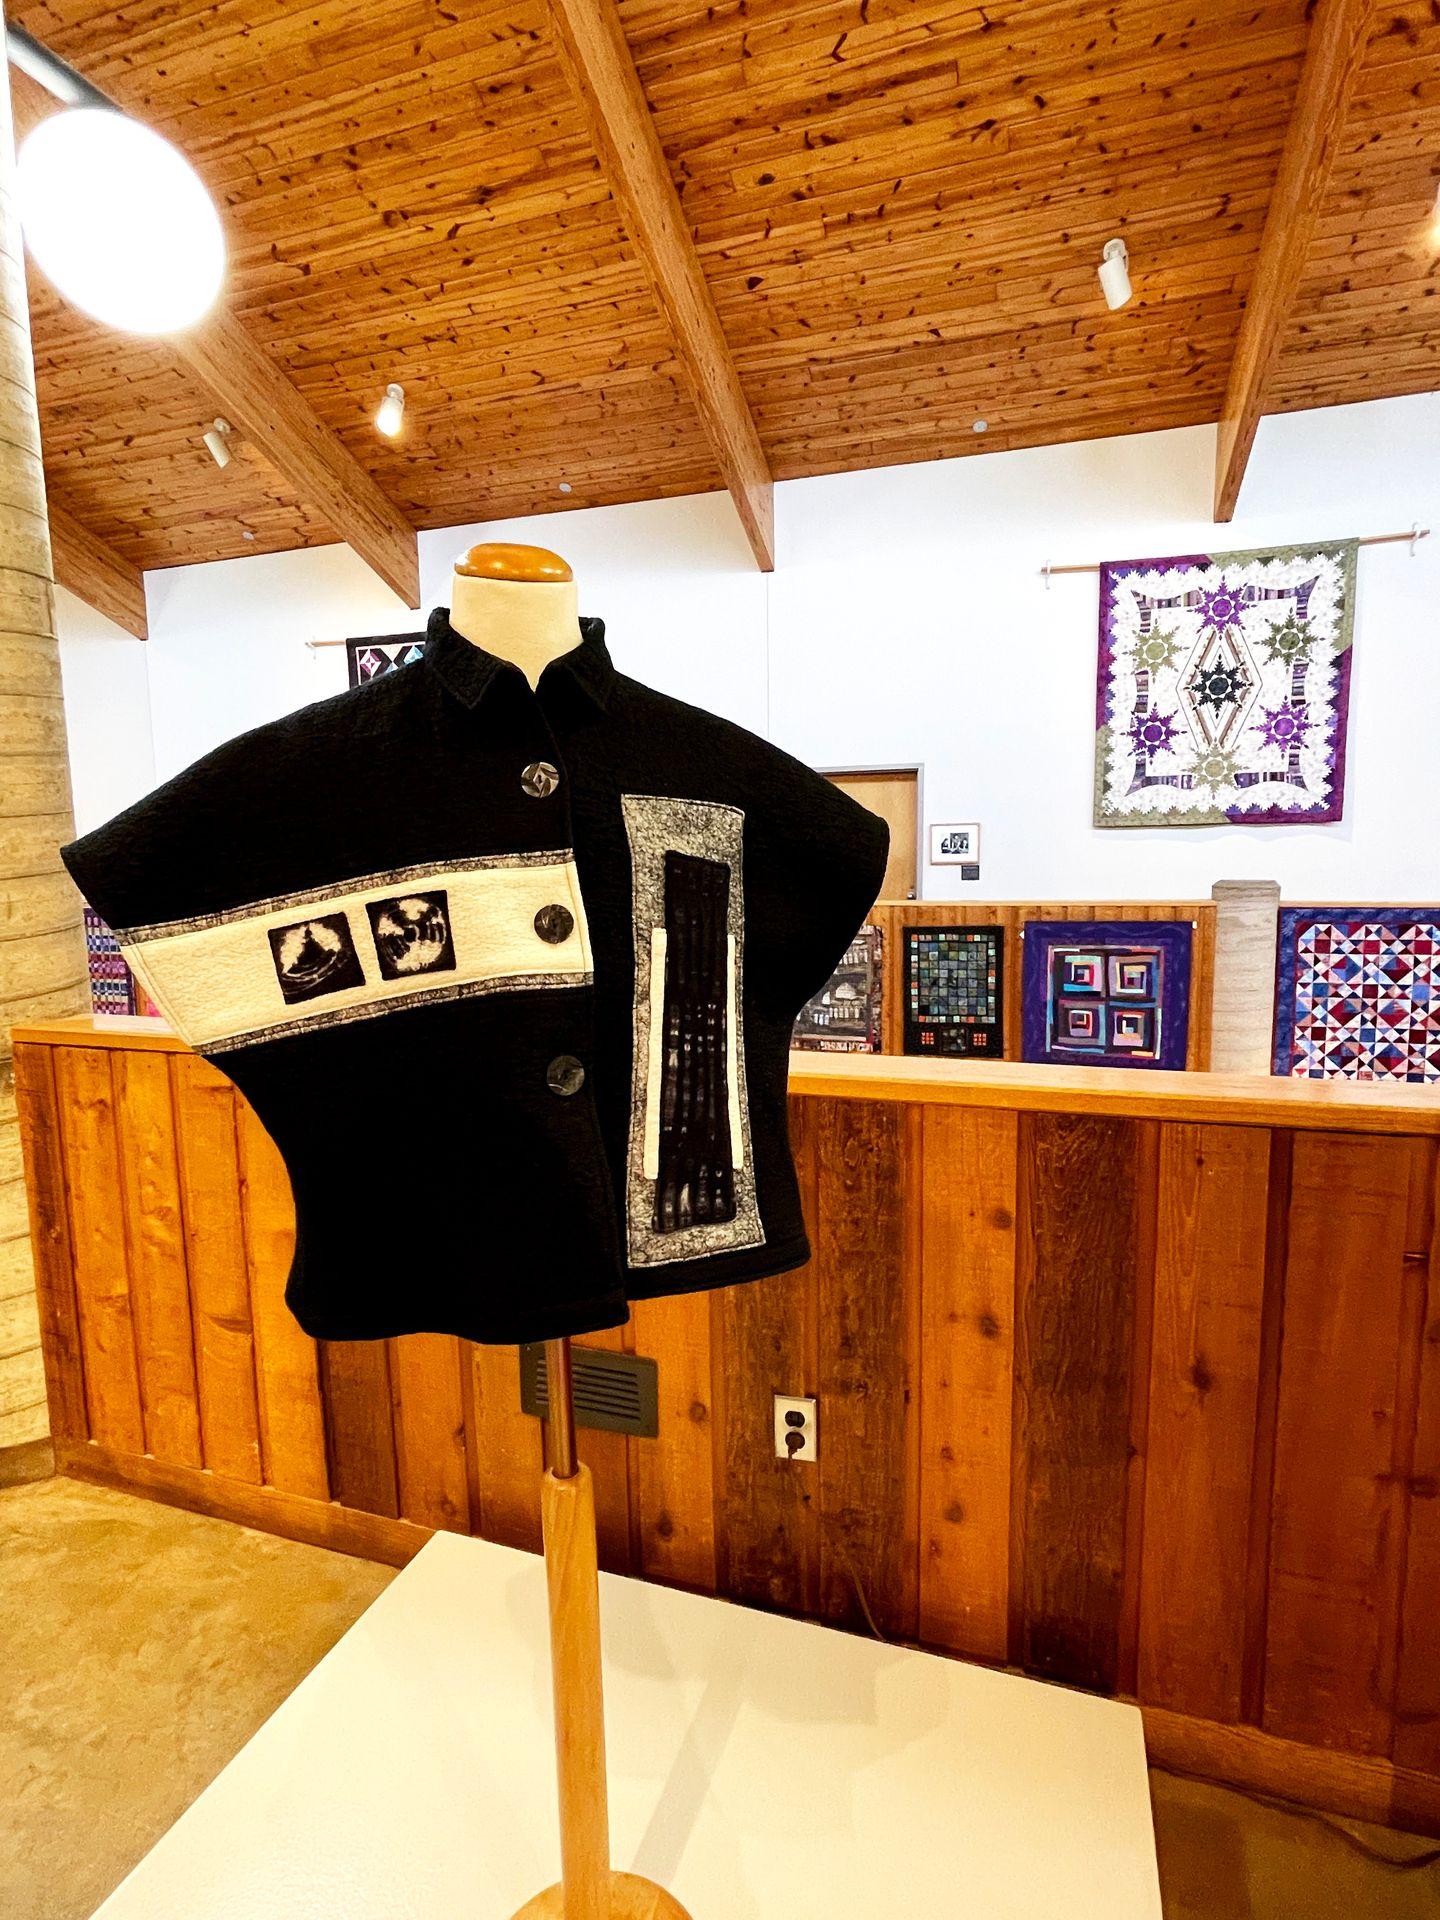 A black and white garment on display at the Folk Arts Center.